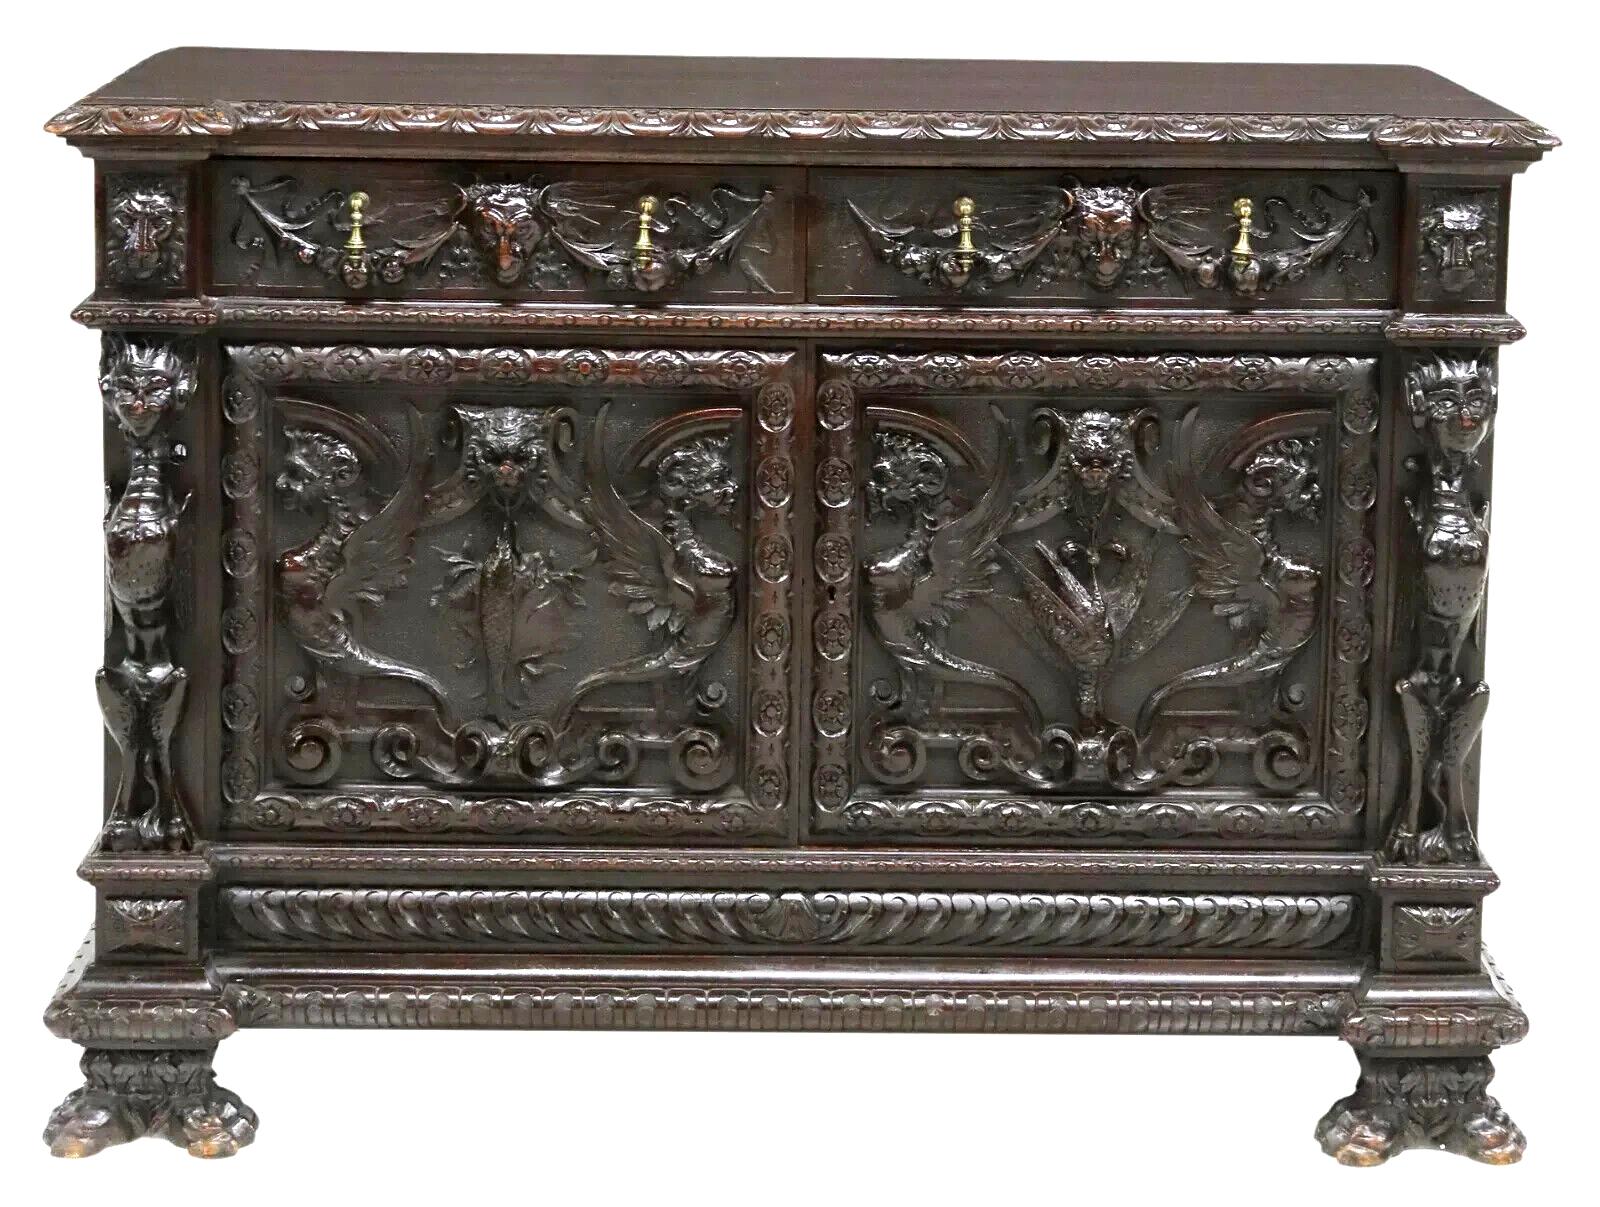 Stunning 1800's Antique Carved, Italian Renaissance Revival, with Lion Masks, Sideboard!!!
Gorgeous Antique Sideboard, Carved, Italian Renaissance Revival, Lion Masks, 1800s, 19th Century!!

This antique sideboard is a stunning piece of furniture